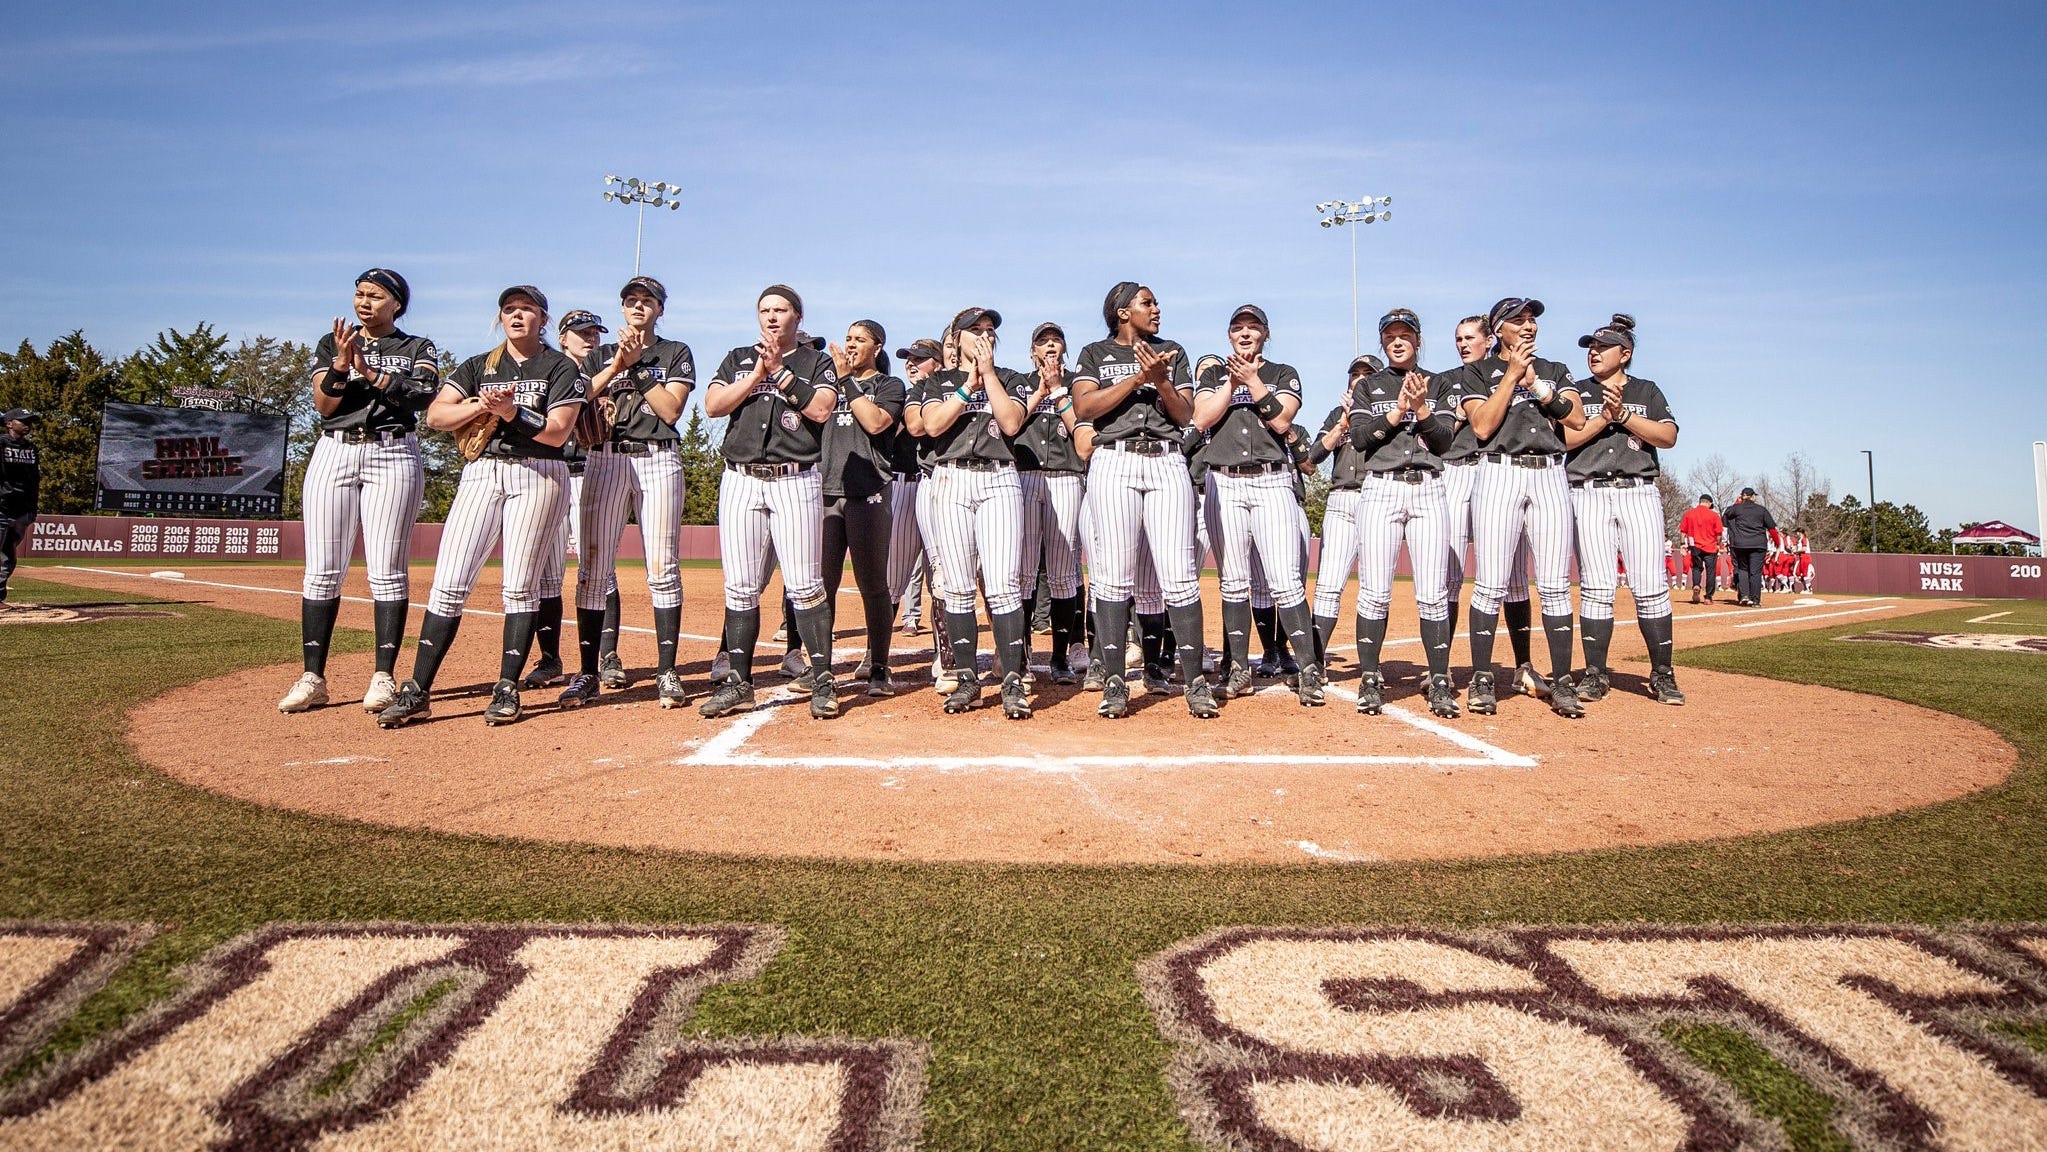 Is Mississippi State softball the hottest team in the SEC Tournament?